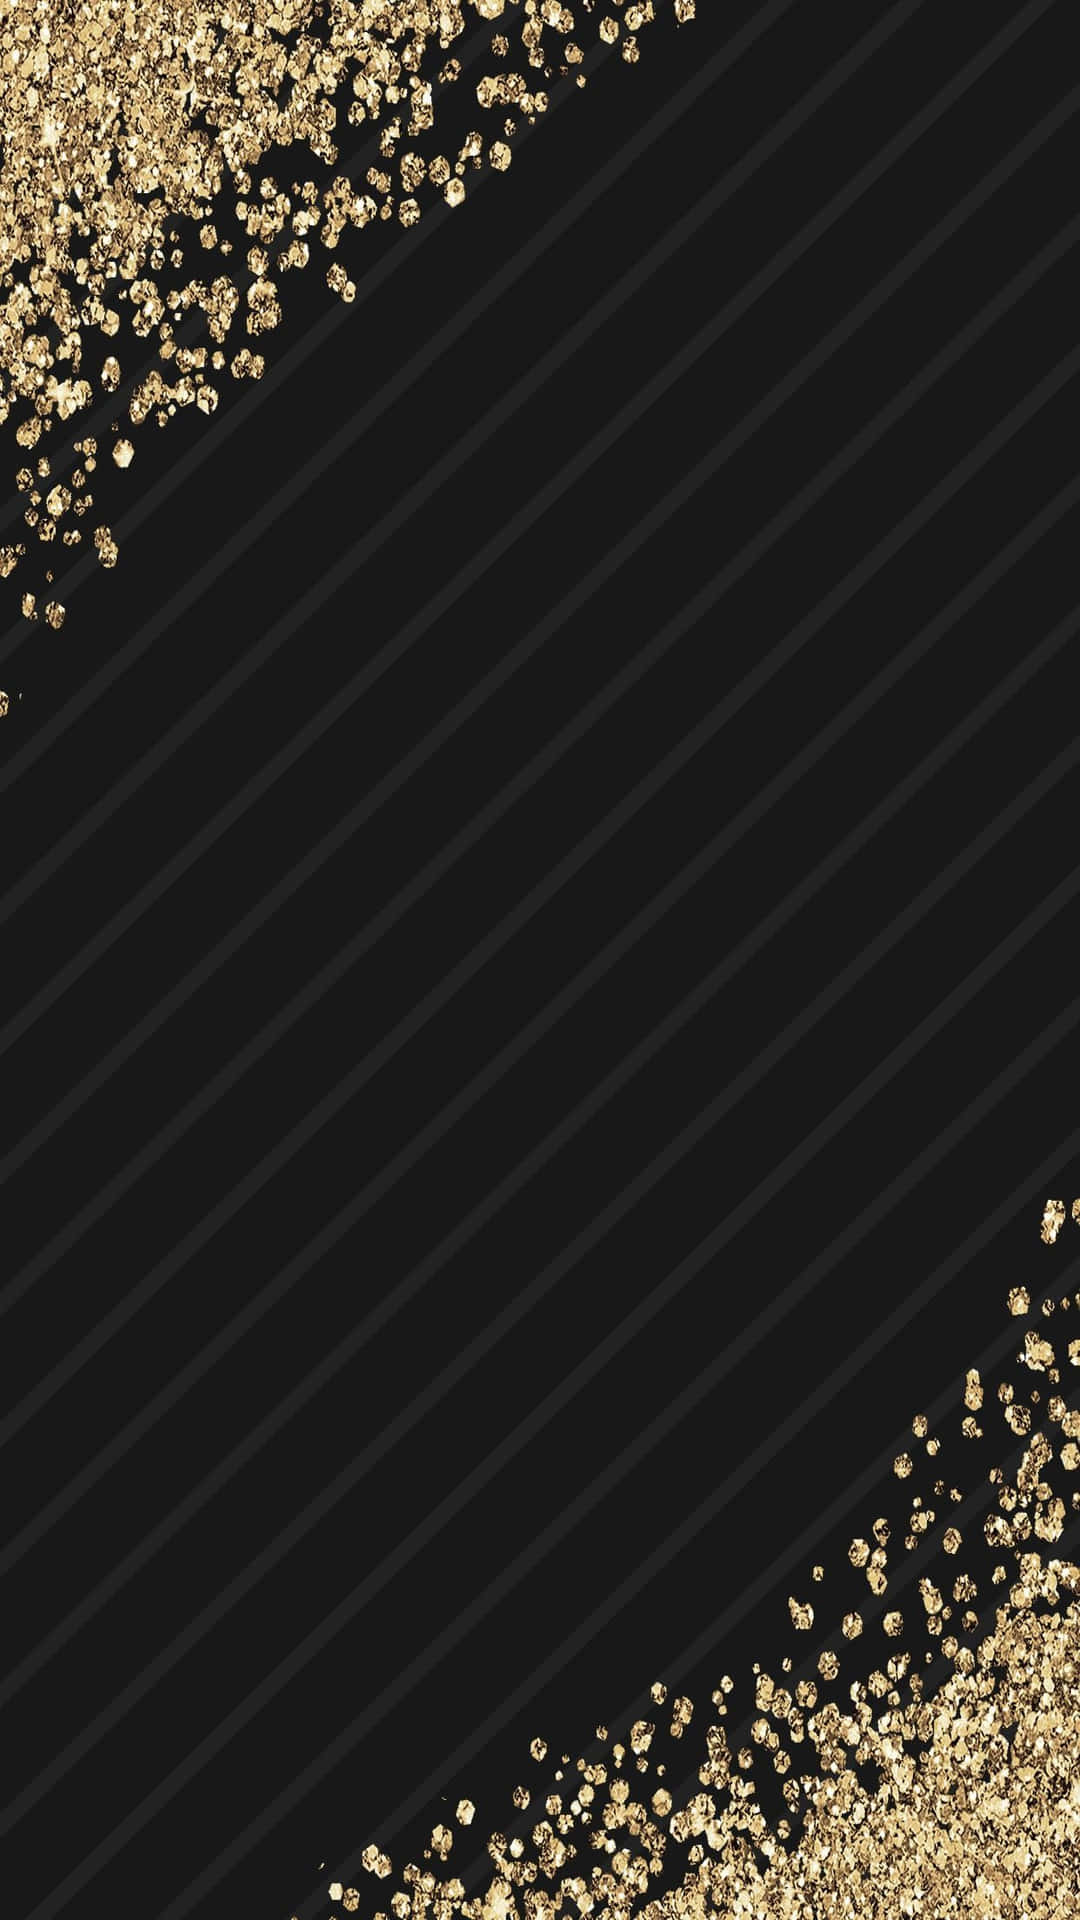 Black and Gold Wallpaper Vector Images (over 79,000)